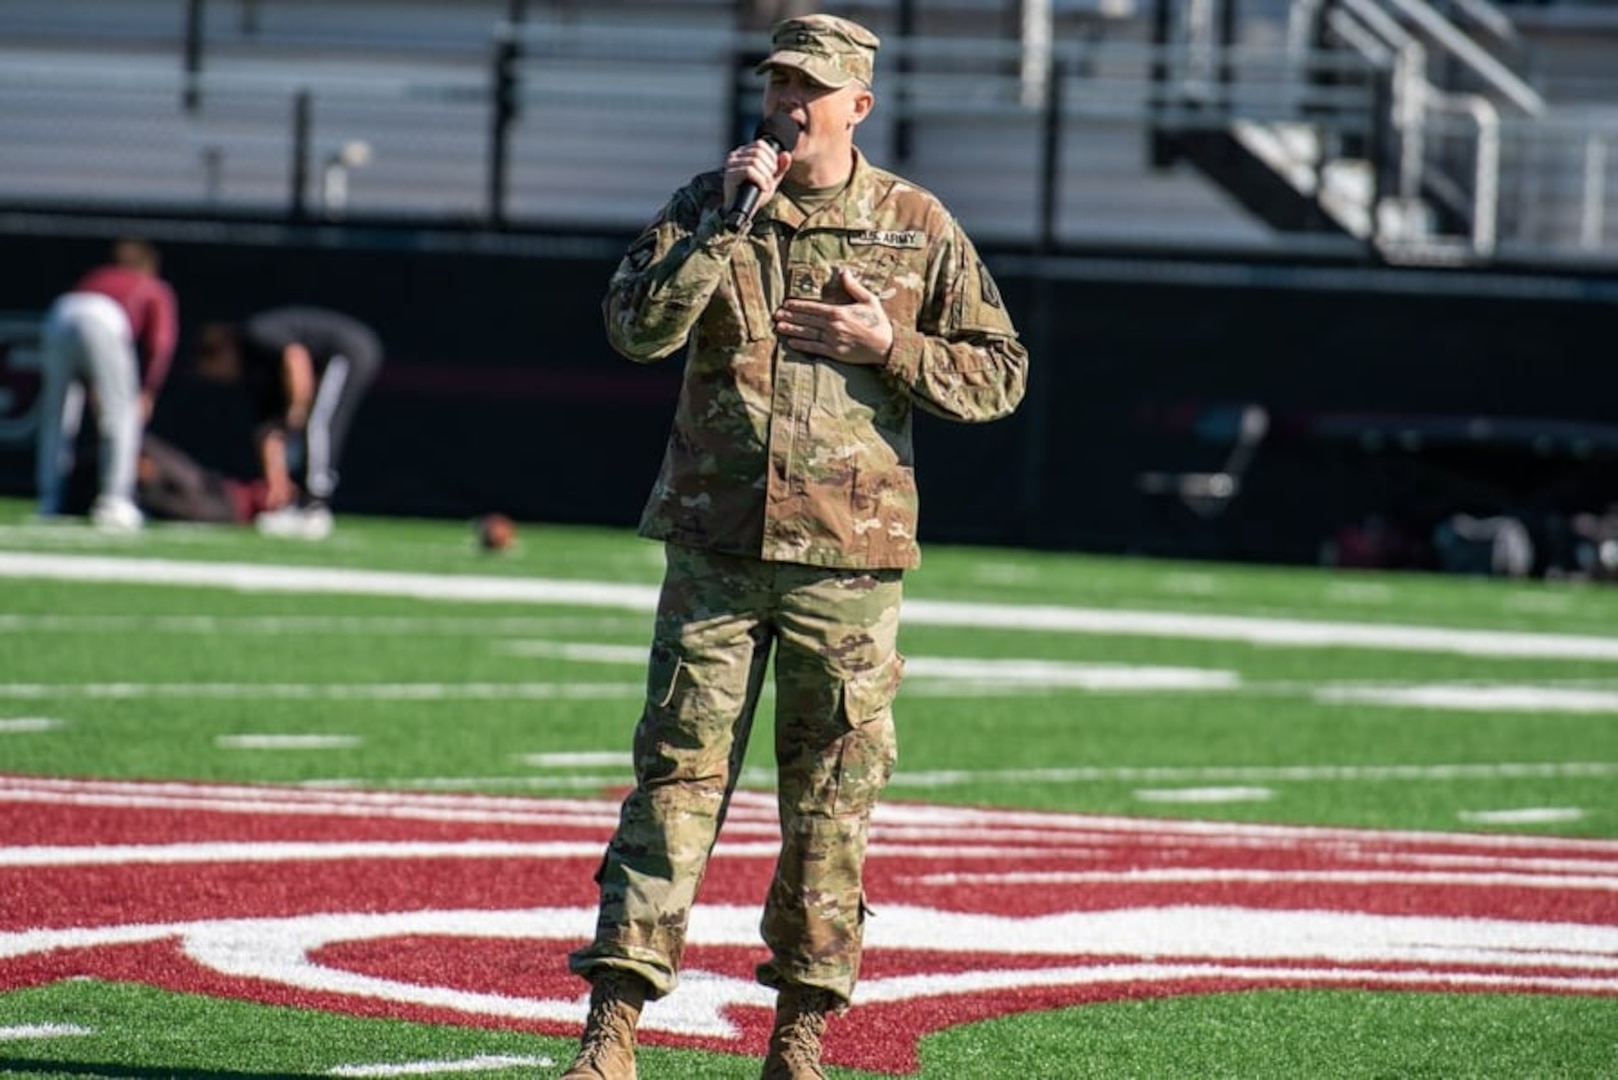 Illinois Army National Guard Sgt. 1st Class David Allen Stone performs ‘Bury These Burdens’ prior to kick-off of the Southern Illinois University Military Appreciation football game against Missouri State University Nov. 6, 2021. Stone wrote and recorded the song to help anyone coping with mental illness and thoughts of suicide.